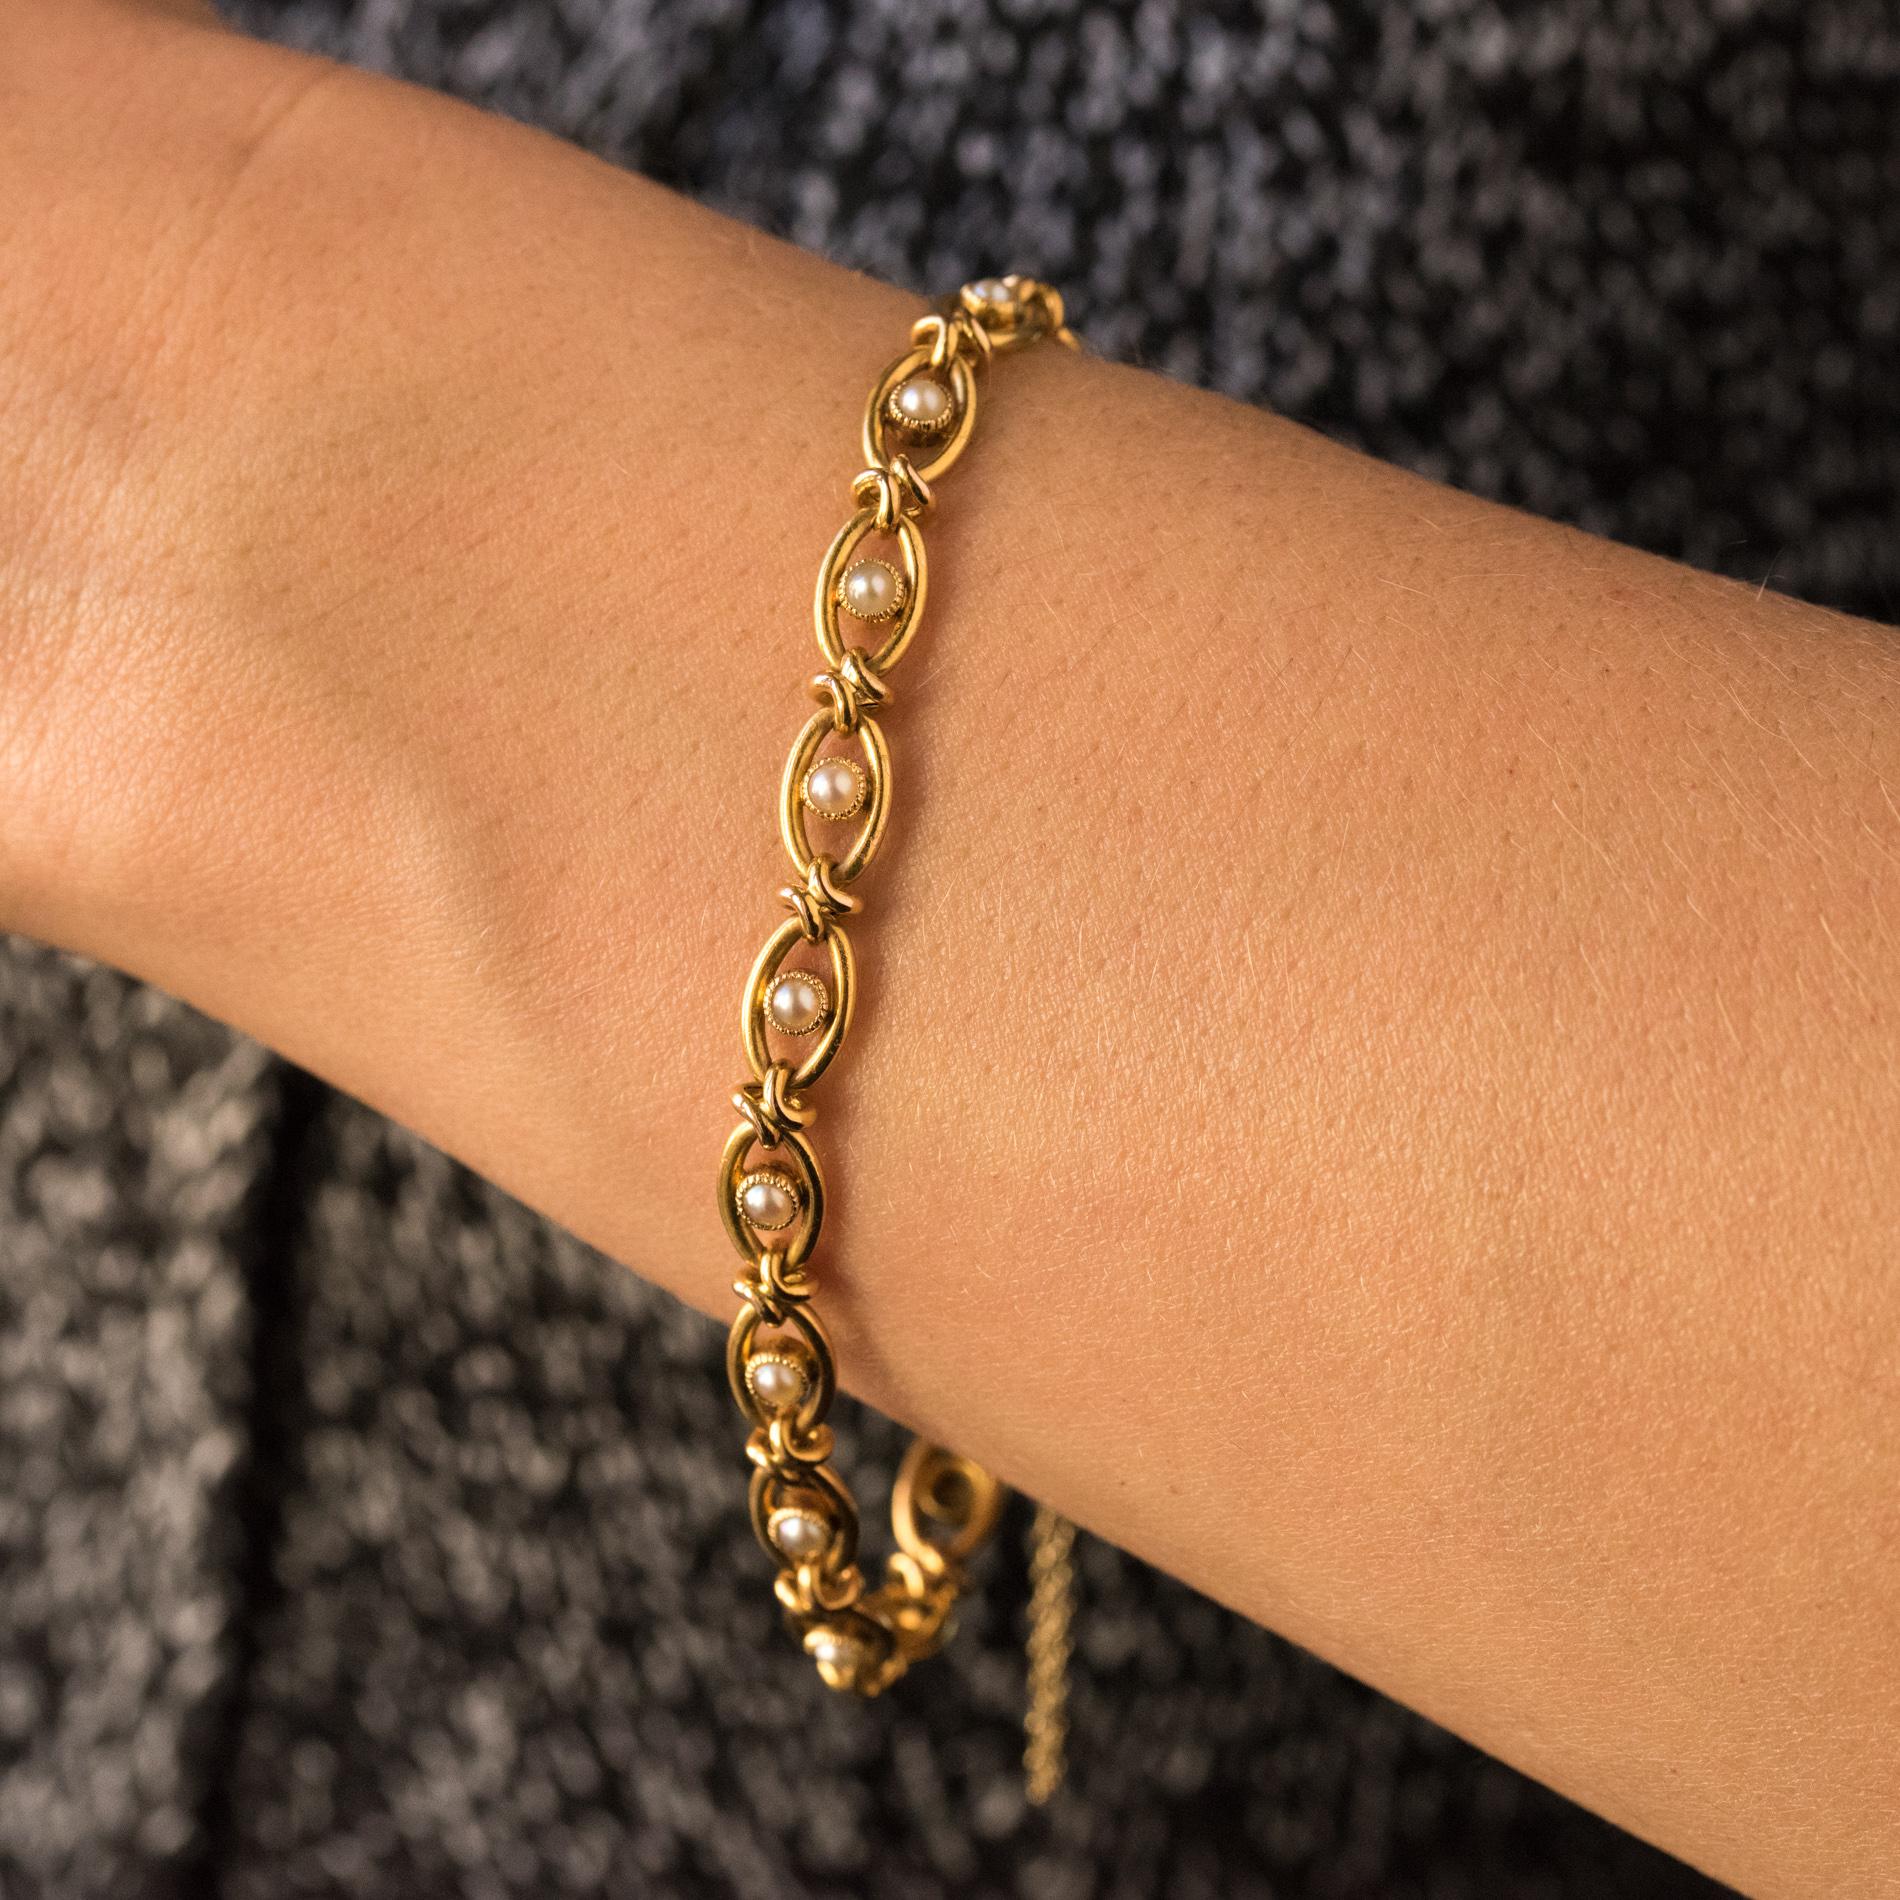 Bracelet in 18 karats yellow gold, eagle's head hallmark.
This charming antique bracelet is made of openwork shuttle mesh set with natural pearls, held together and articulated by a small knot. The clasp is ratchet with safety chain.
Length: 19 cm,